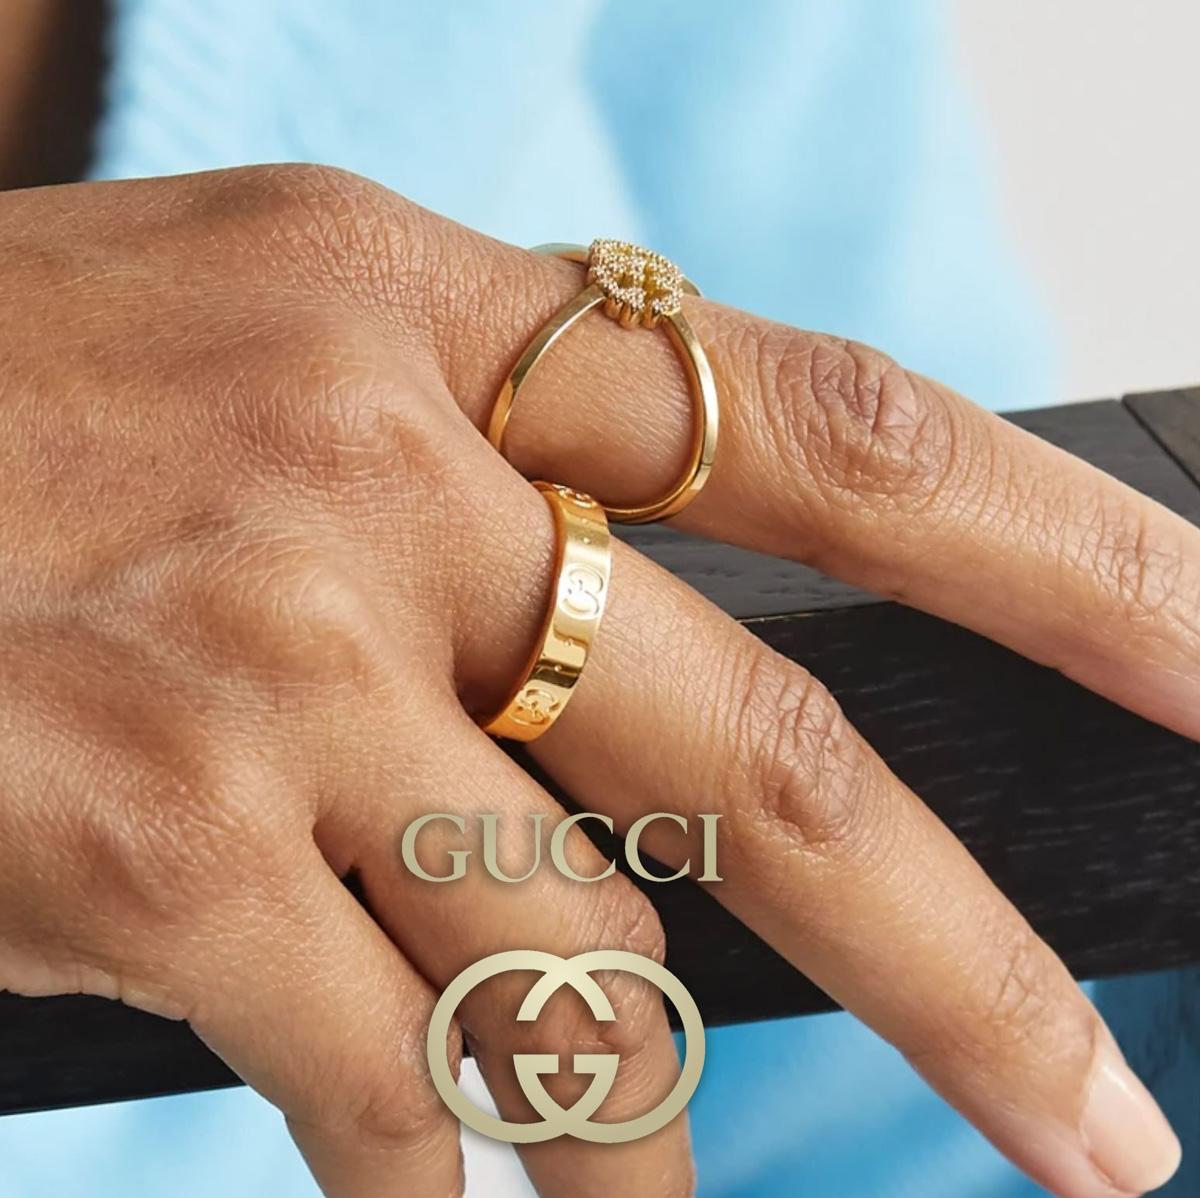 Gucci Ring size chart : Do Gucci rings run big or small?